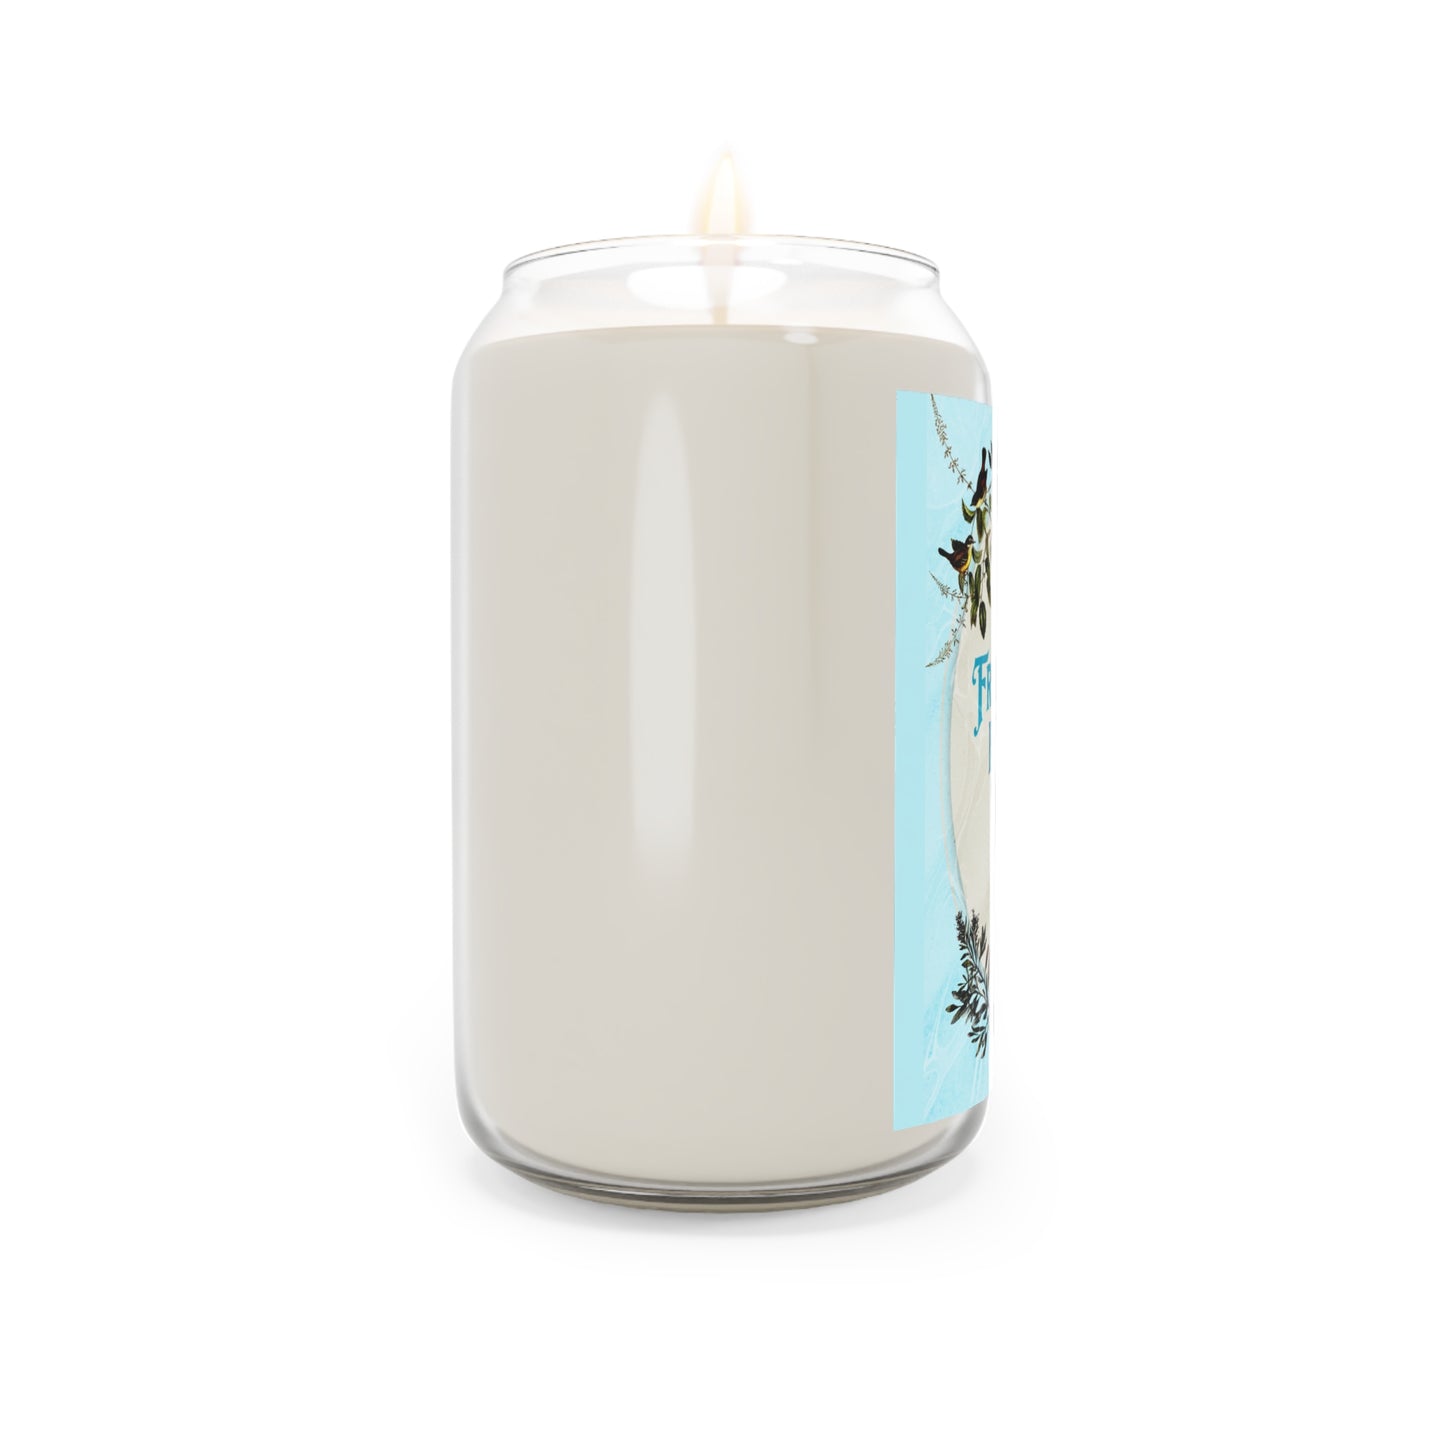 OOI-Scented Friendship Candle, 13.75oz (Extra Large)